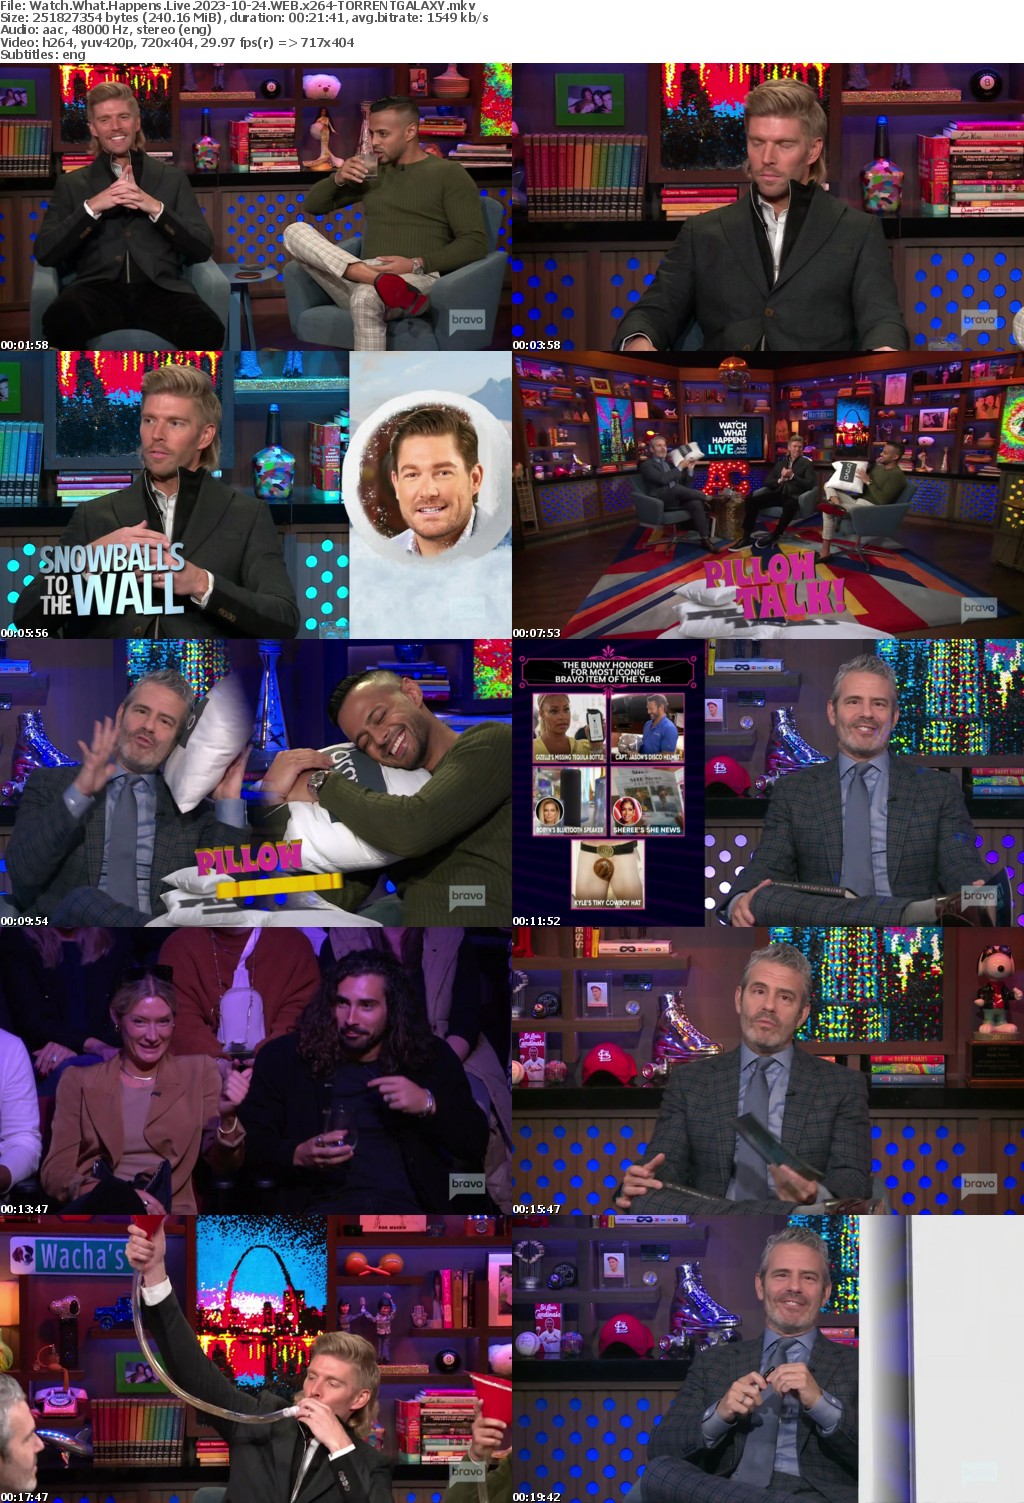 Watch What Happens Live 2023-10-24 WEB x264-GALAXY